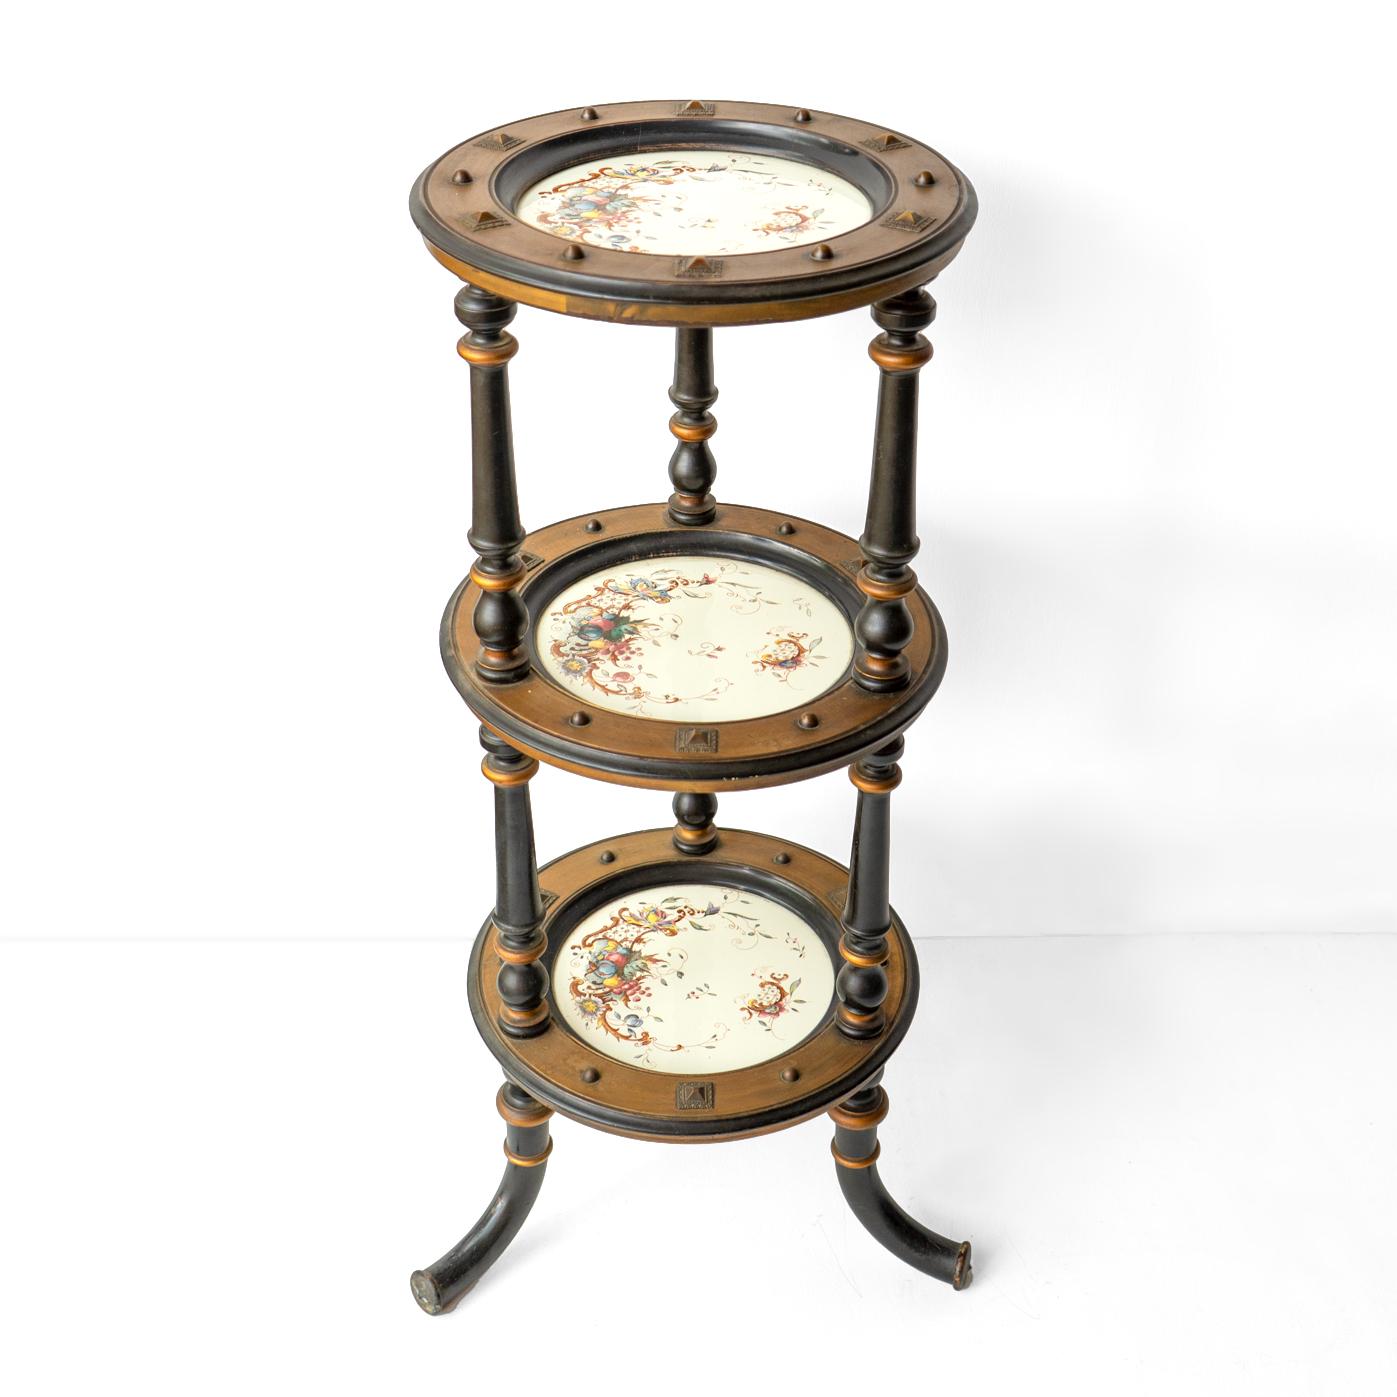 ANTIQUE DISPLAY STAND
Three removable porcelain circular plates decorated with floral motifs are inlaid in an ebonised and gilt faux bamboo wooden stand with metal embellishments.

Dating from the Aesthetic period, circa 1880.

Suitable as a stand